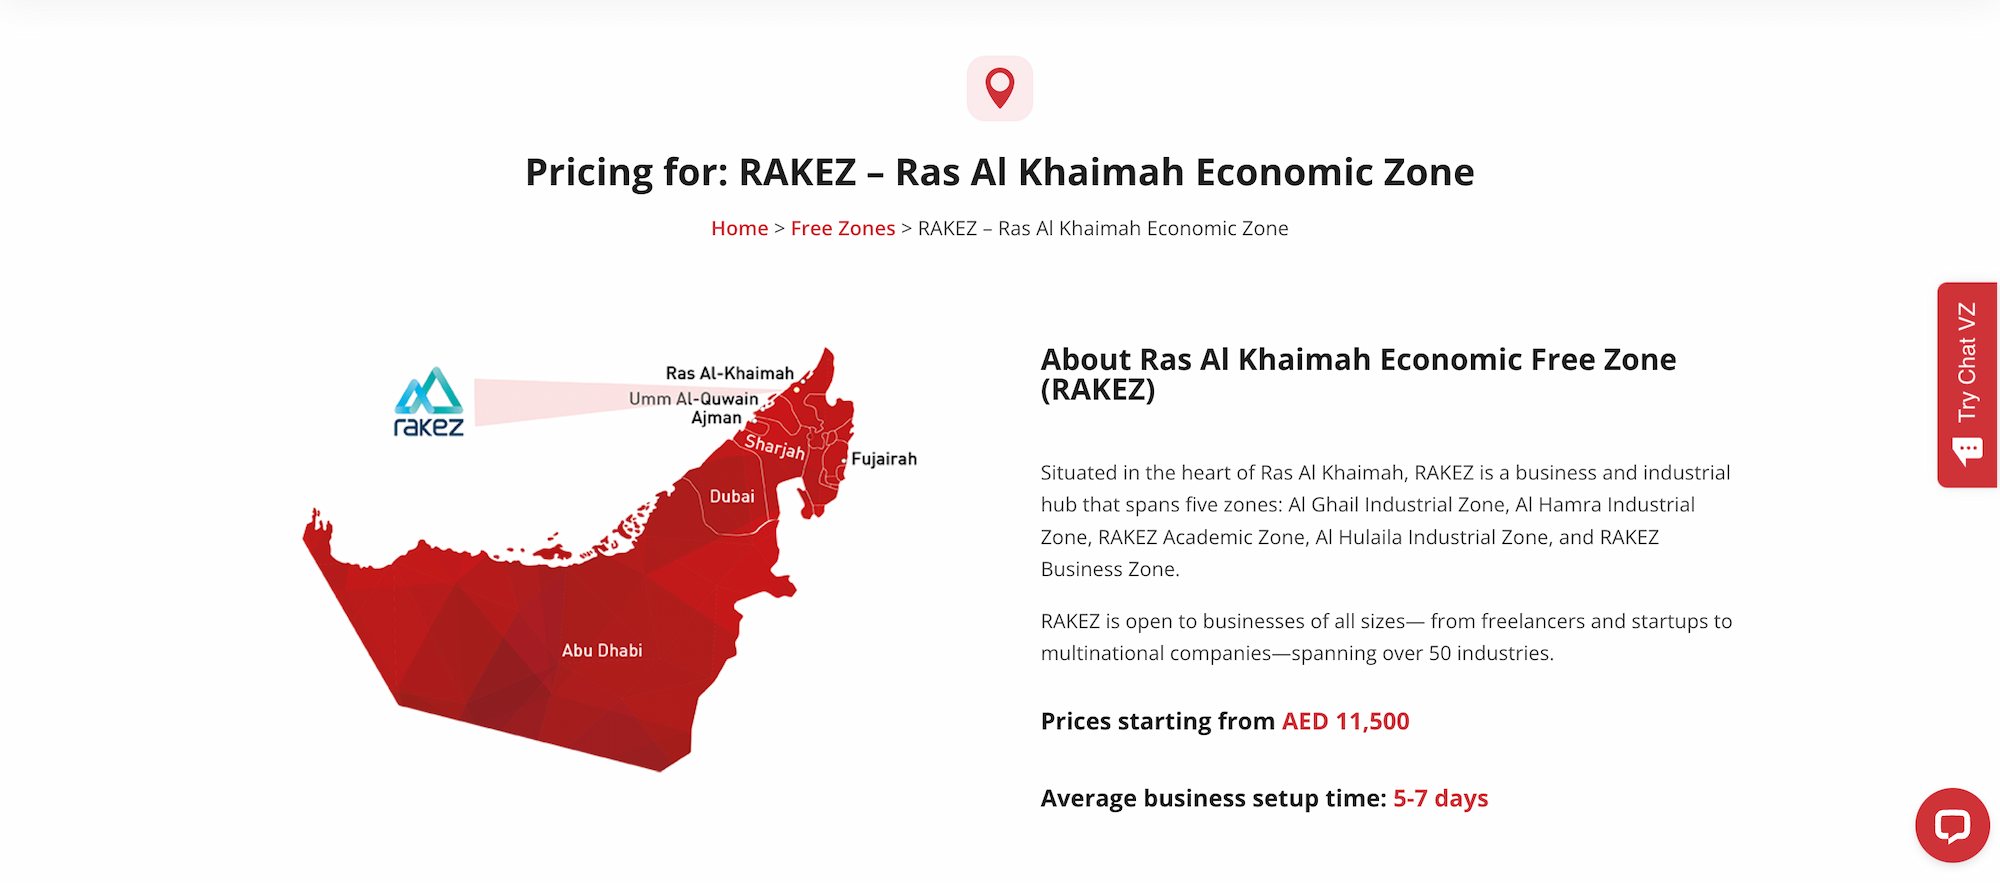 An overview and pricing information of the RAKEZ Free Zone.